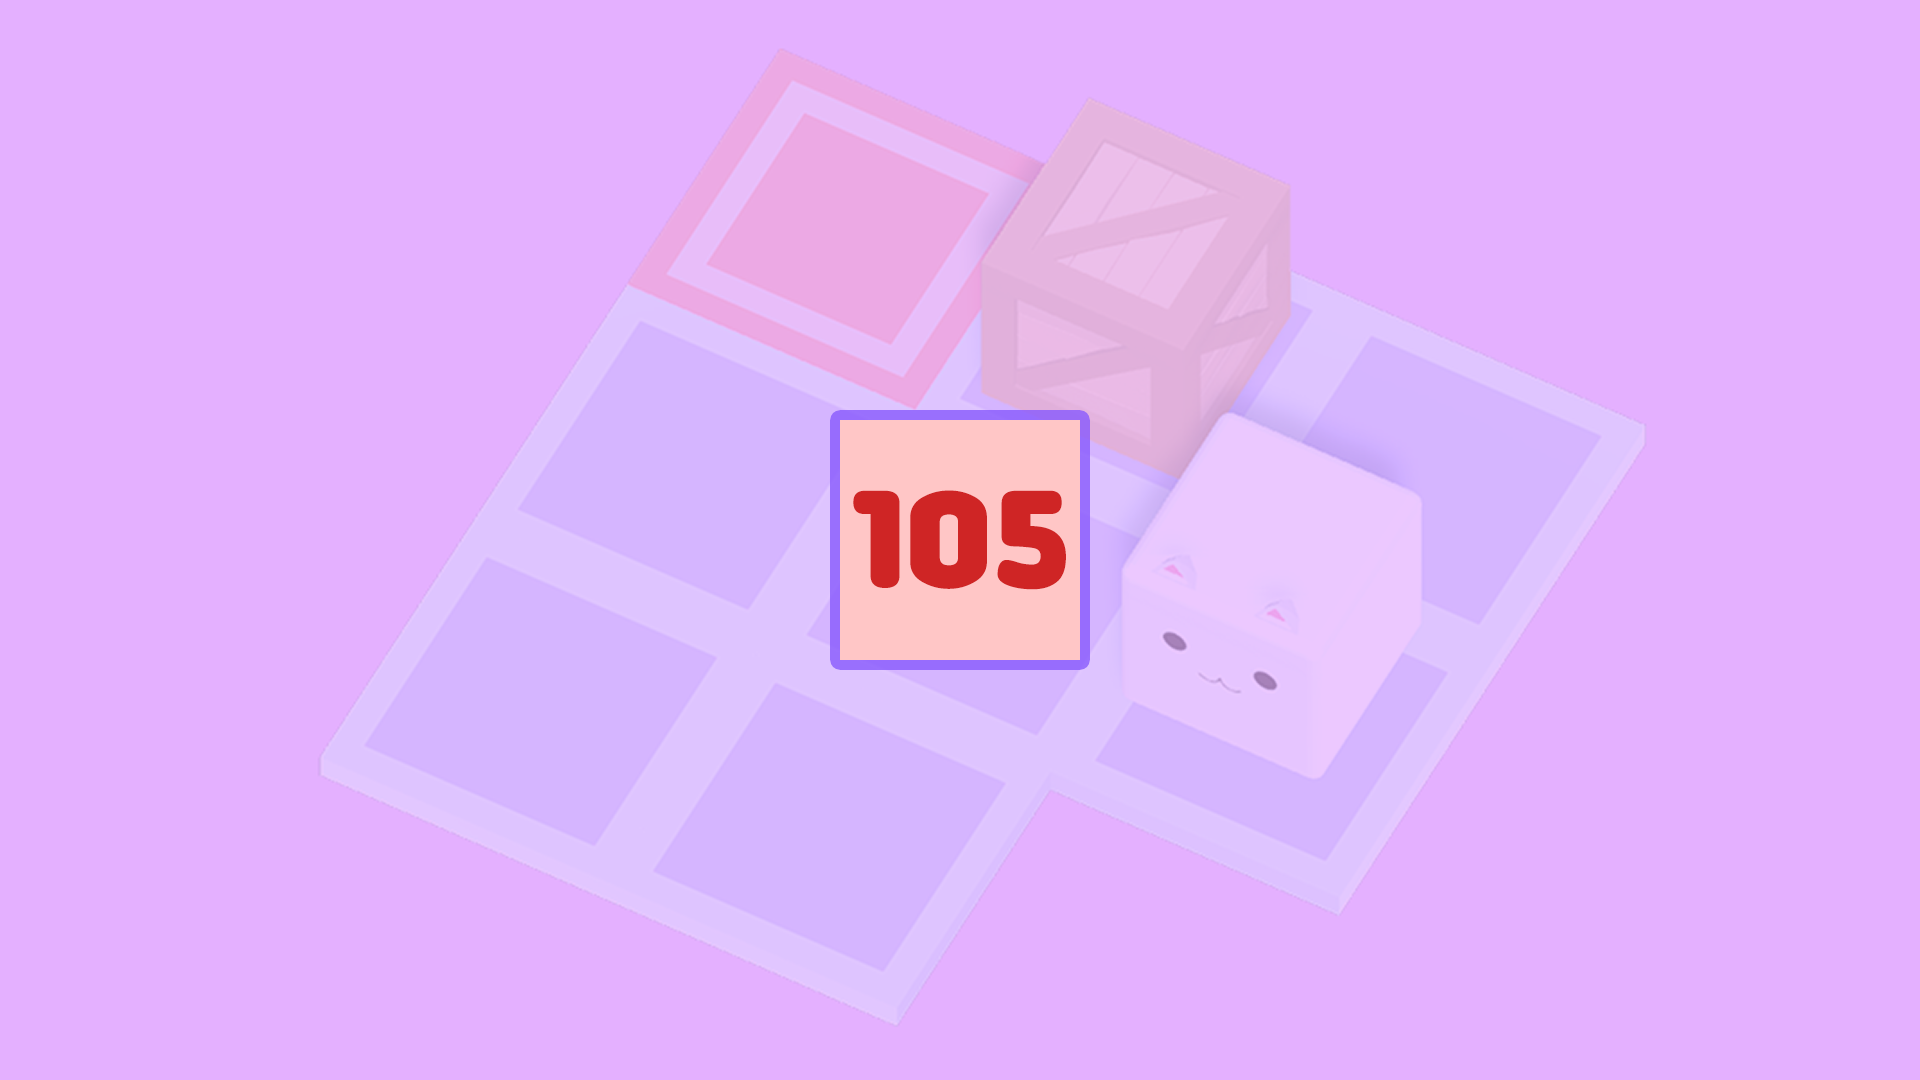 Icon for Level 105